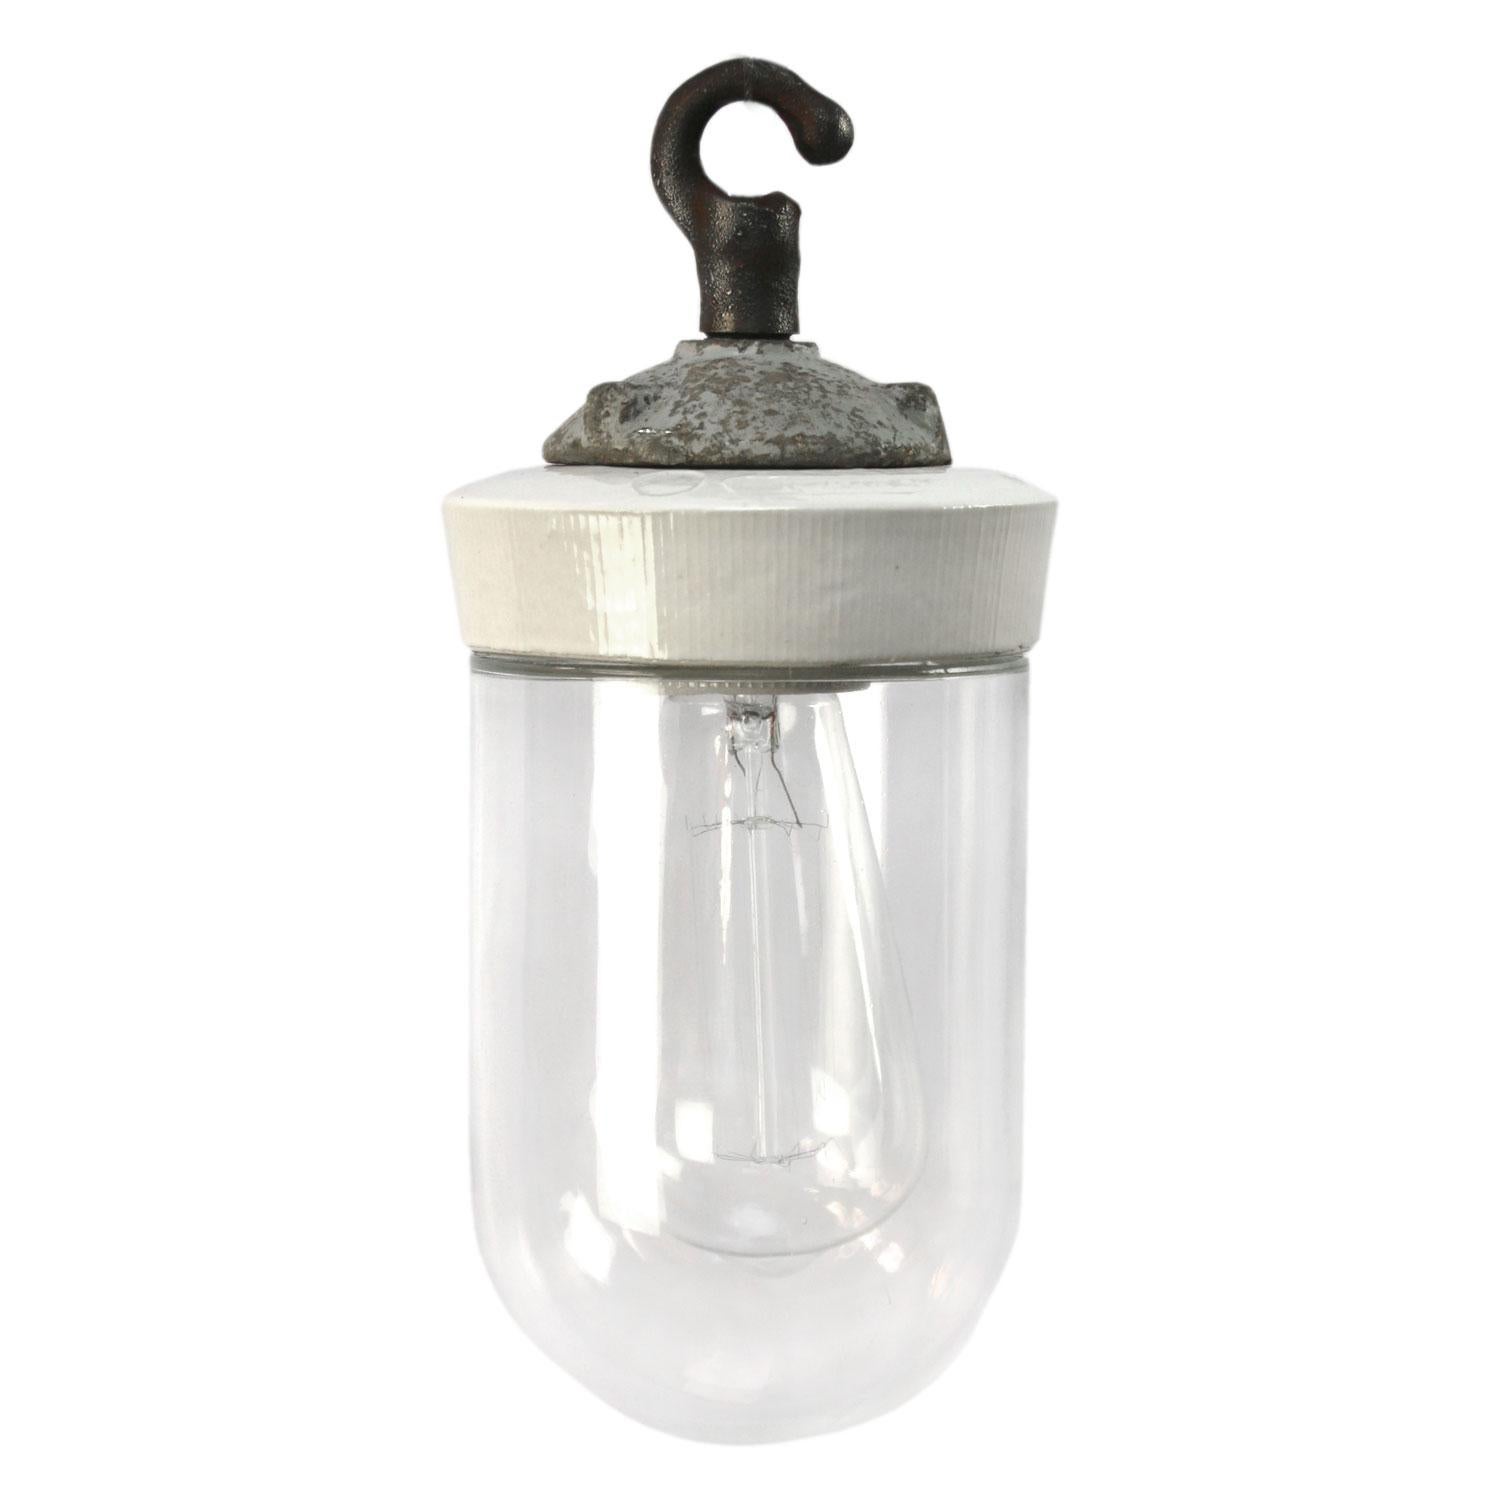 Porcelain industrial hanging lamp.
White porcelain, cast iron and clear glass.
2 conductors, no ground.

Weight: 1.90 kg / 4.2 lb

Priced per individual item. All lamps have been made suitable by international standards for incandescent light